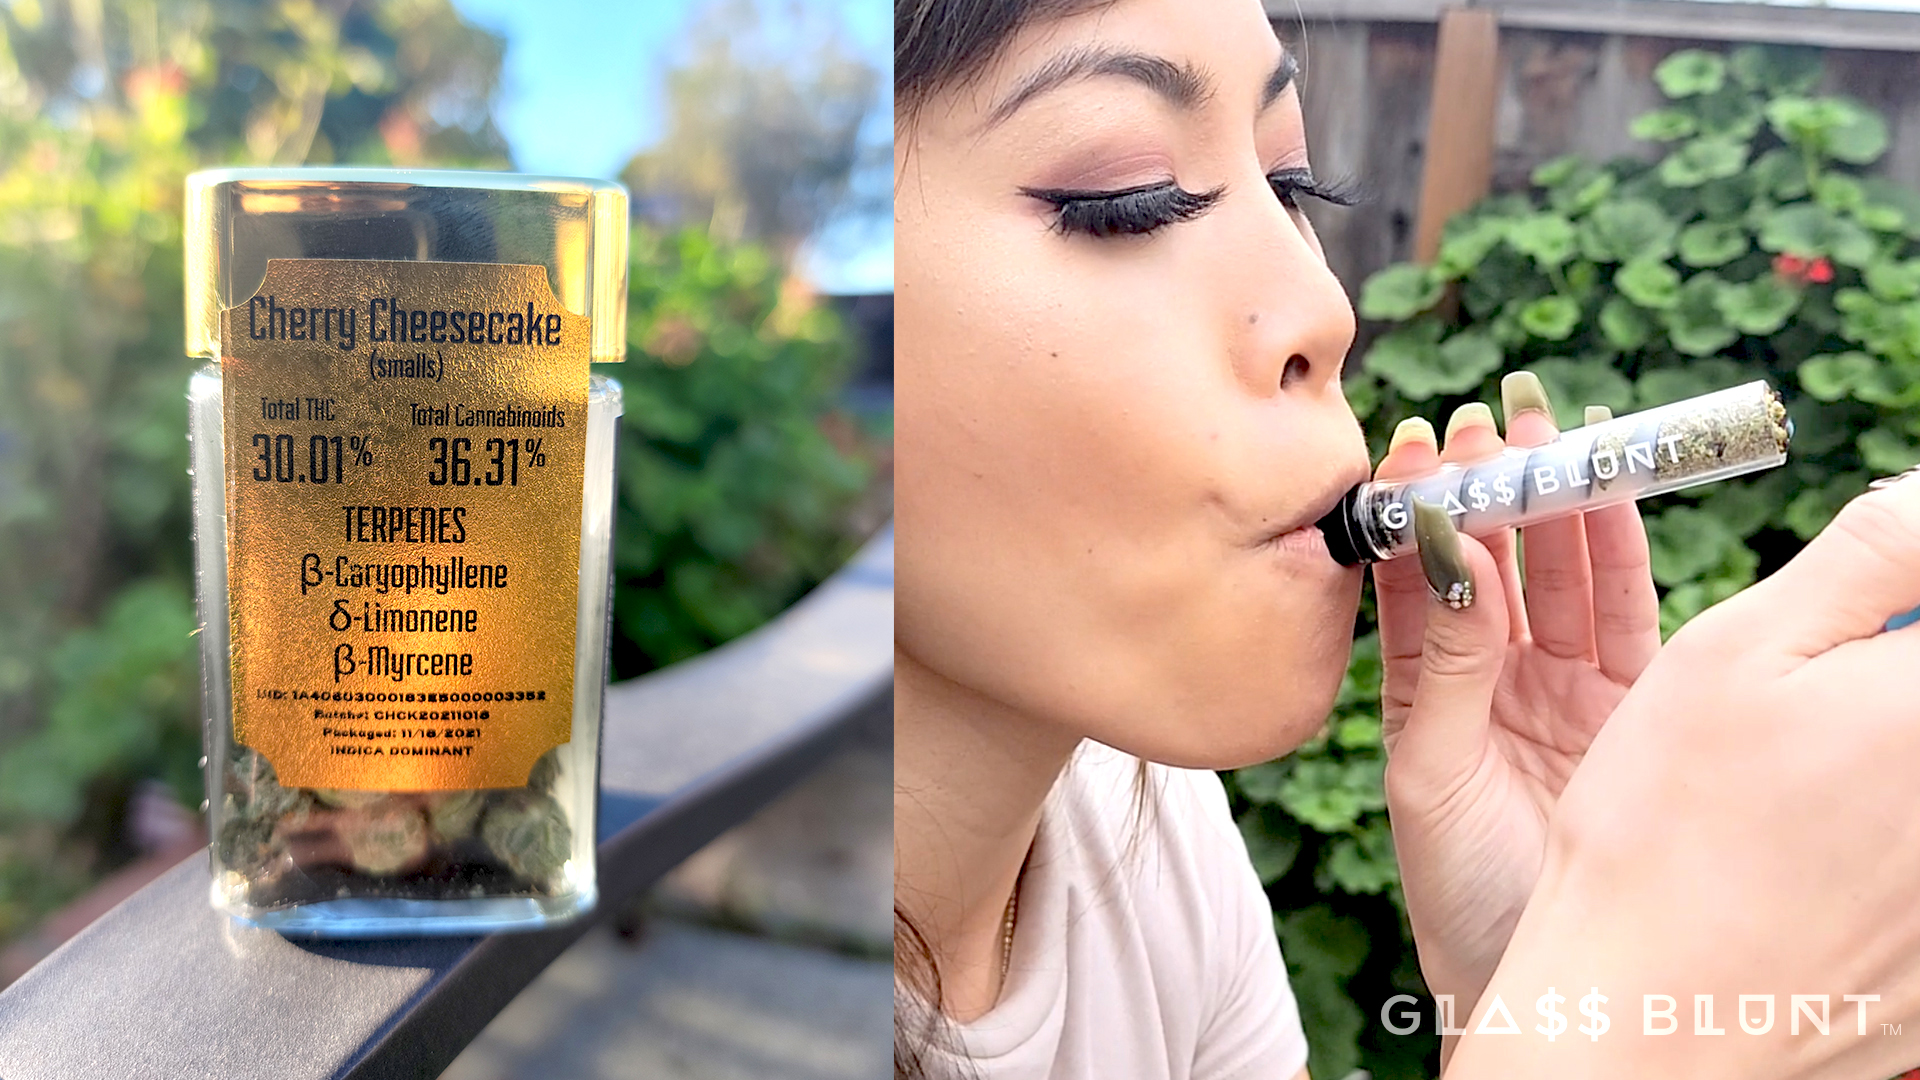 , Best Stoner Gift for Cannabis Smokers in 2021, Glassblunt